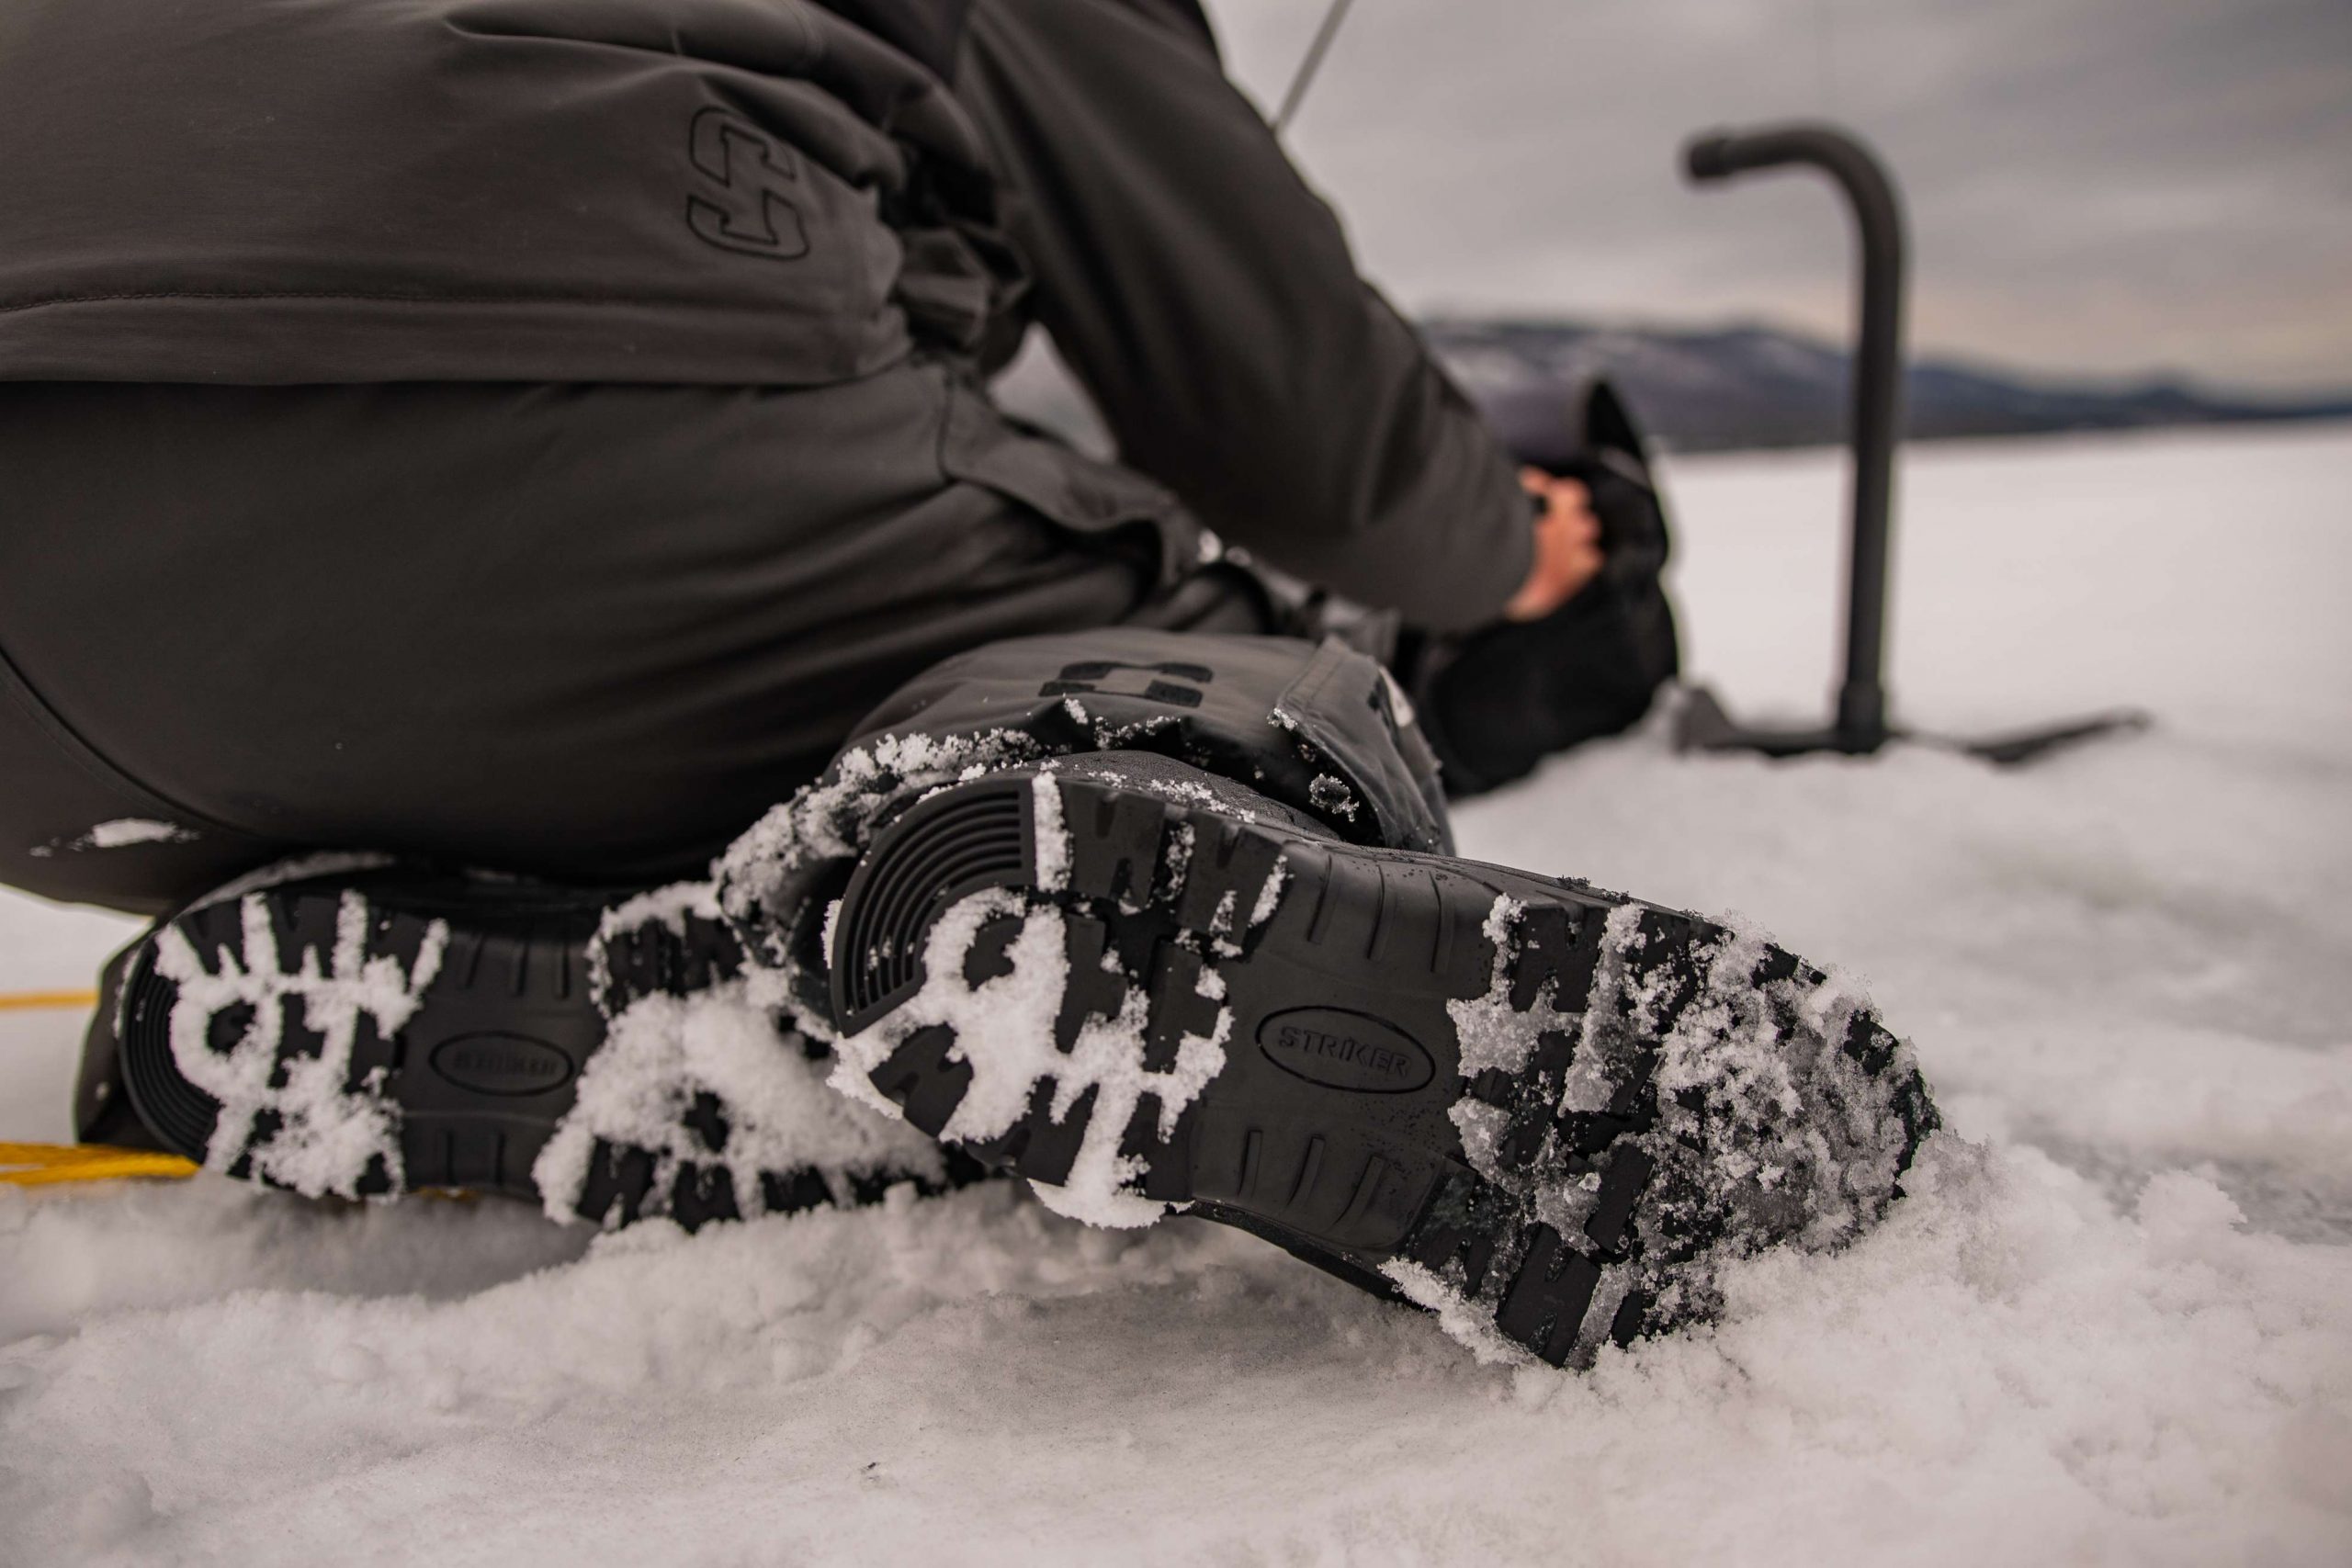 The Striker Ice Boot packs 1200 Grams of Thinsulate Insulation. Being comfortable is key on the boat or the ice.